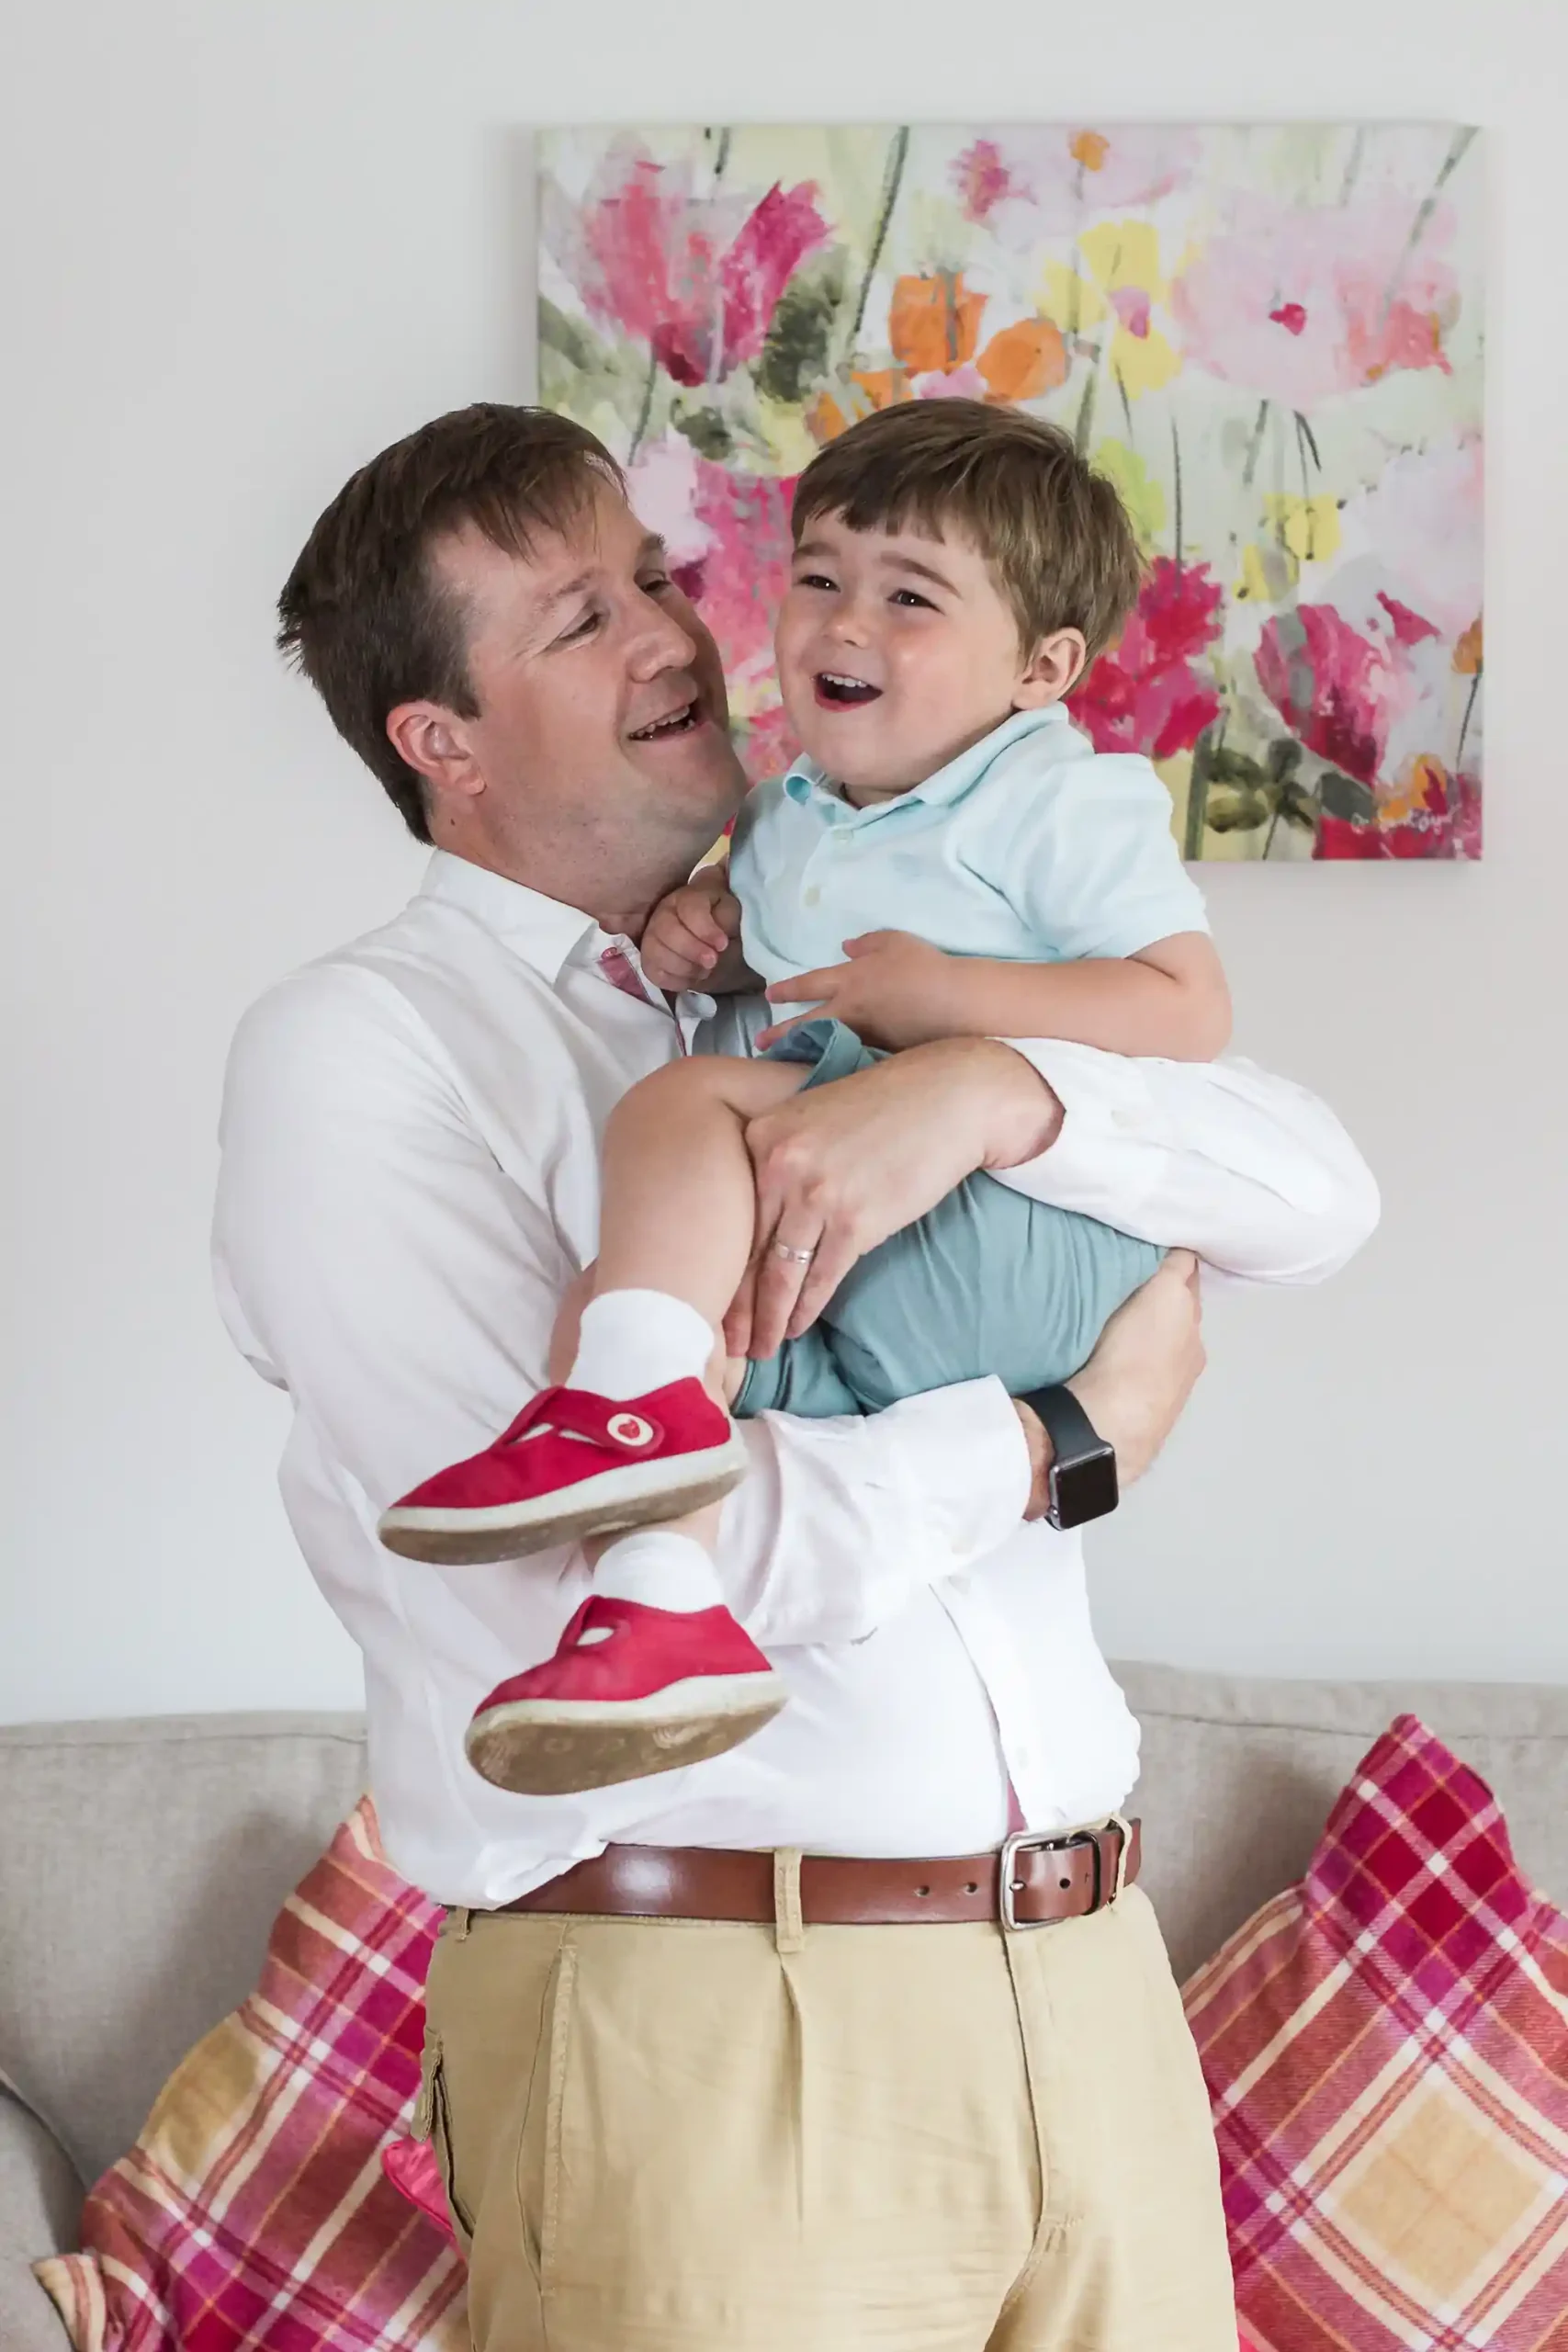 A man in a white shirt and beige pants is holding and smiling at a young boy in a blue shirt and red shoes. They are standing in a living room with a floral painting and plaid pillows.